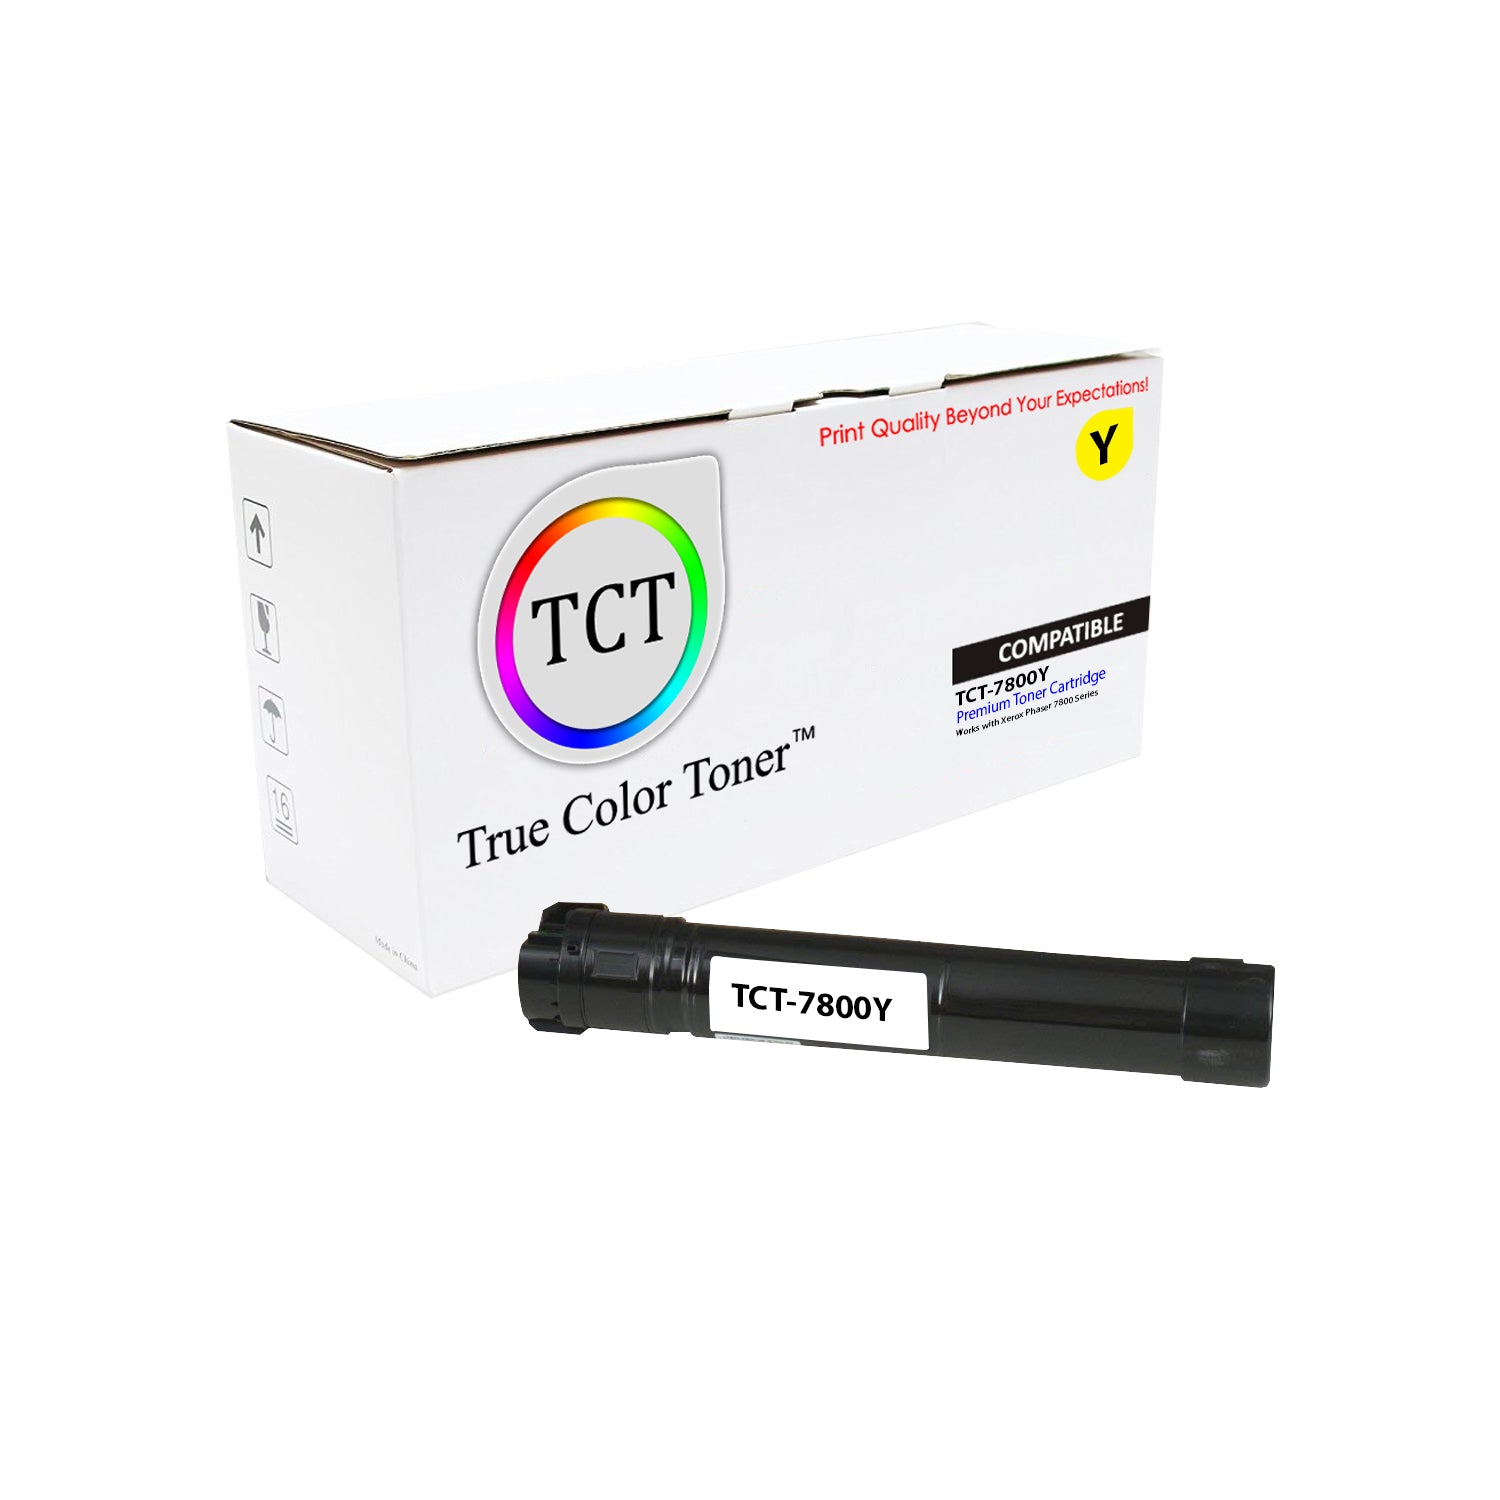 TCT Compatible High Yield Toner Cartridge Replacement for the Xerox 7800 Series - 1 Pack Yellow